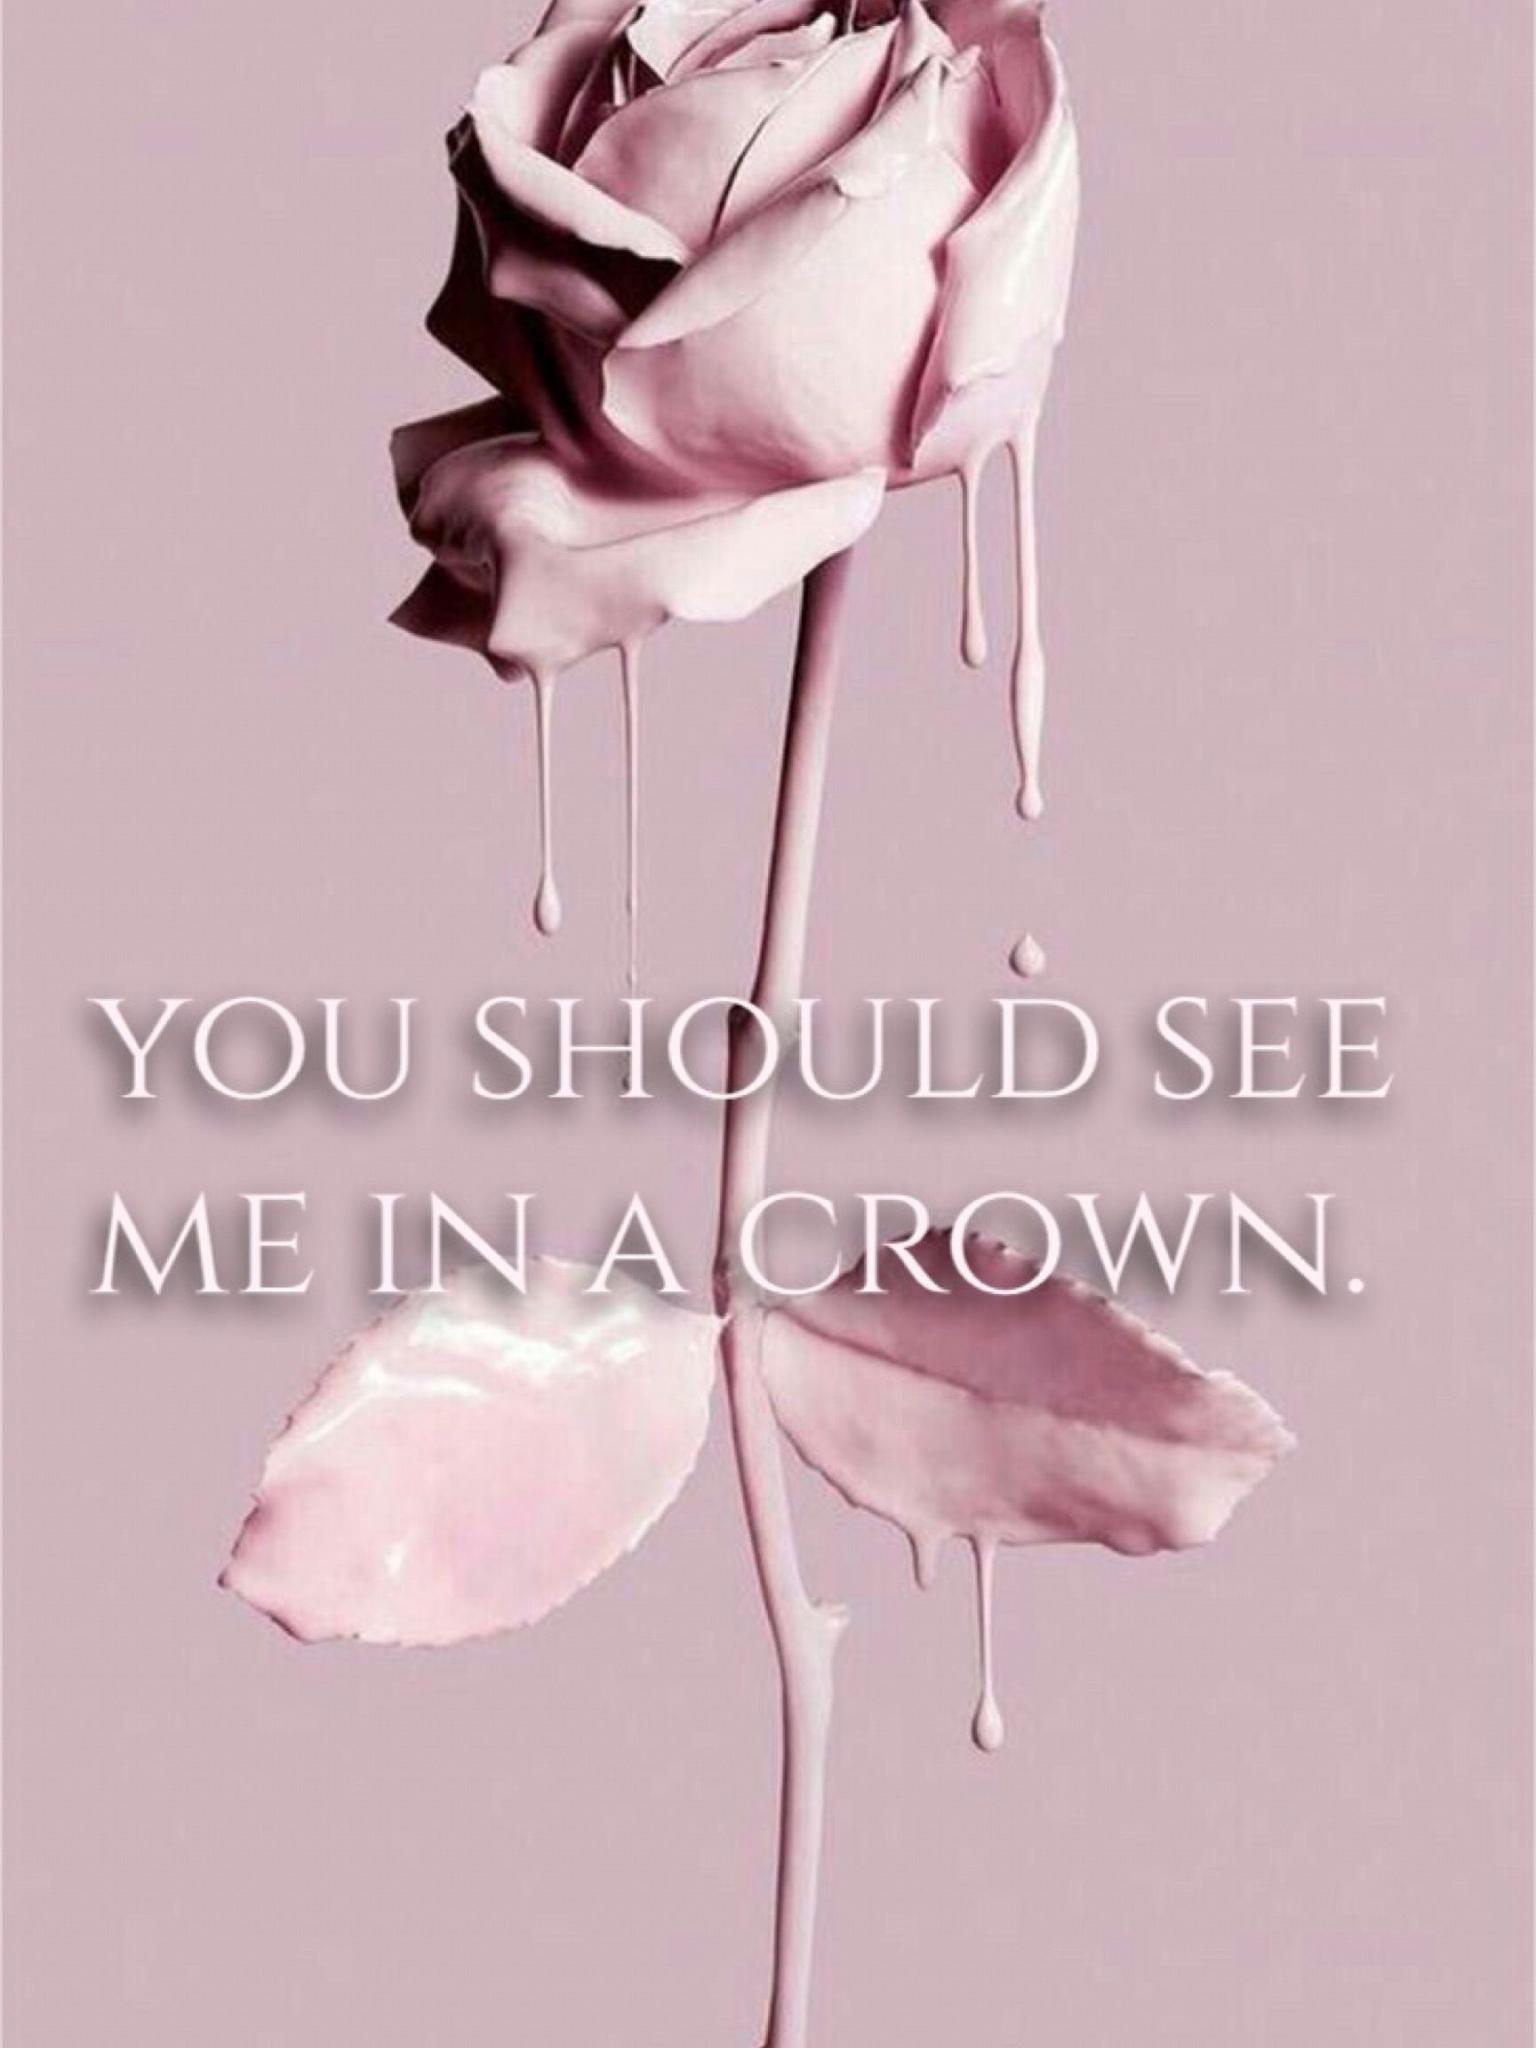 Free download You should see me in a crown Billie Eilish